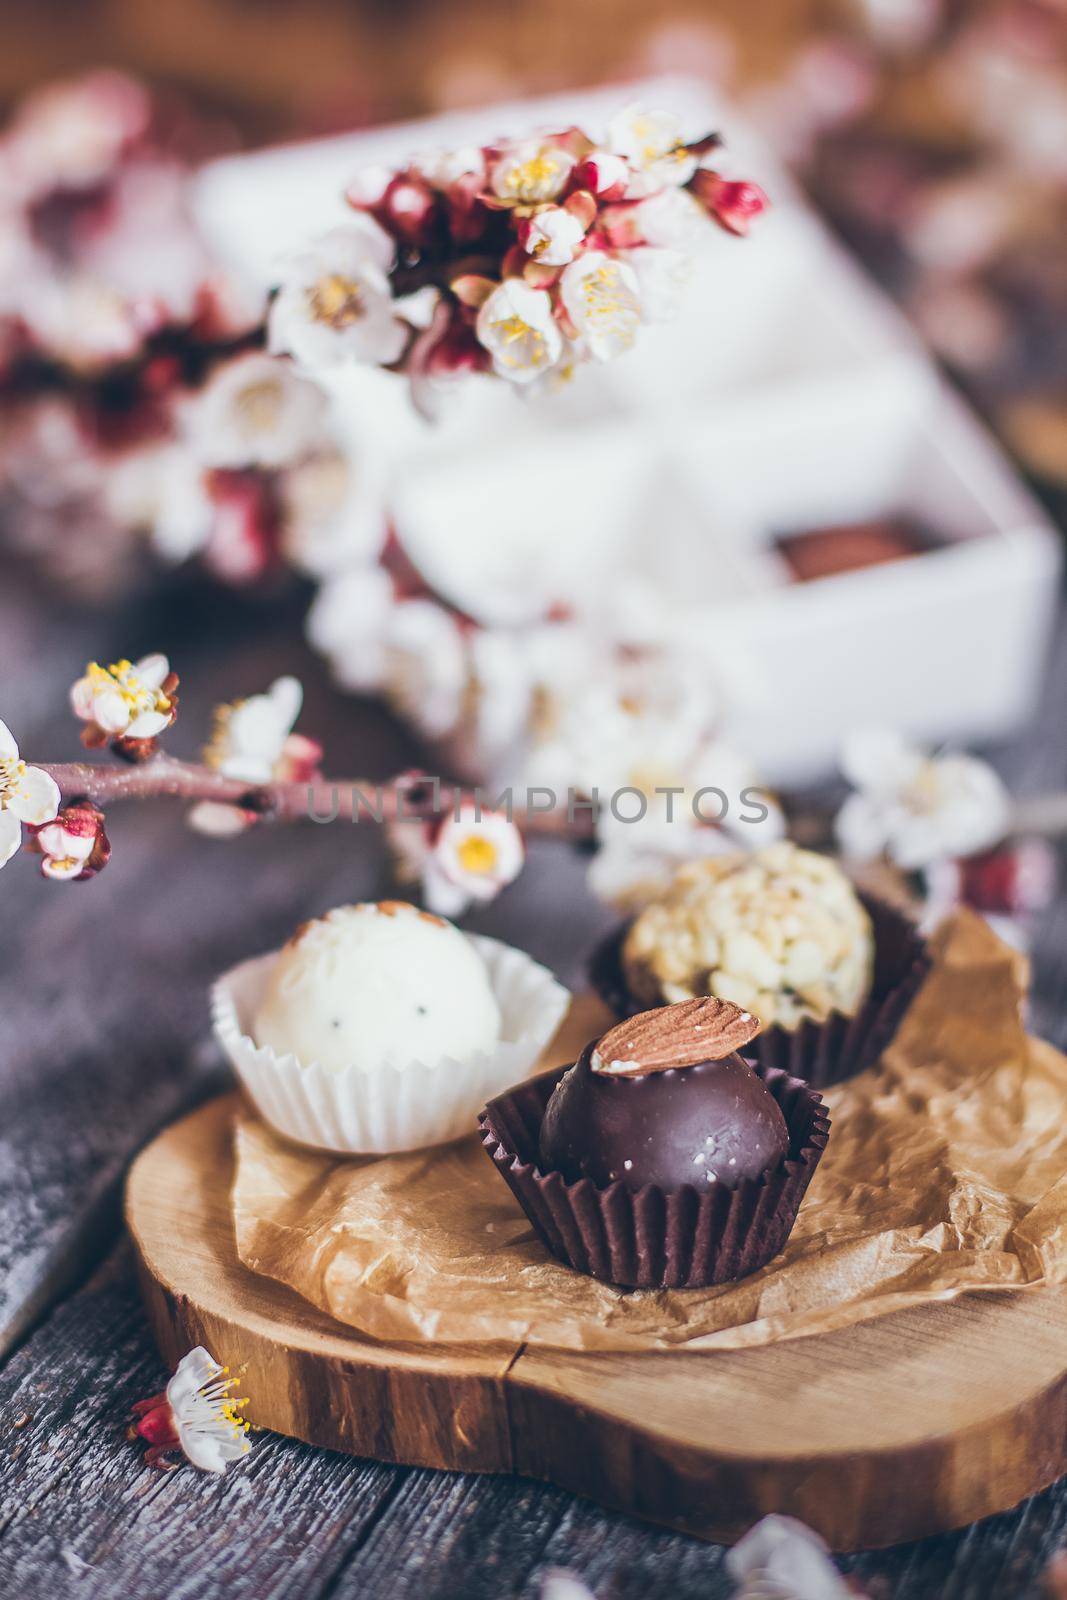 Spring collection of handmade chocolate bonbons candies and cherry flowers decoration on rustic wooden background by mmp1206